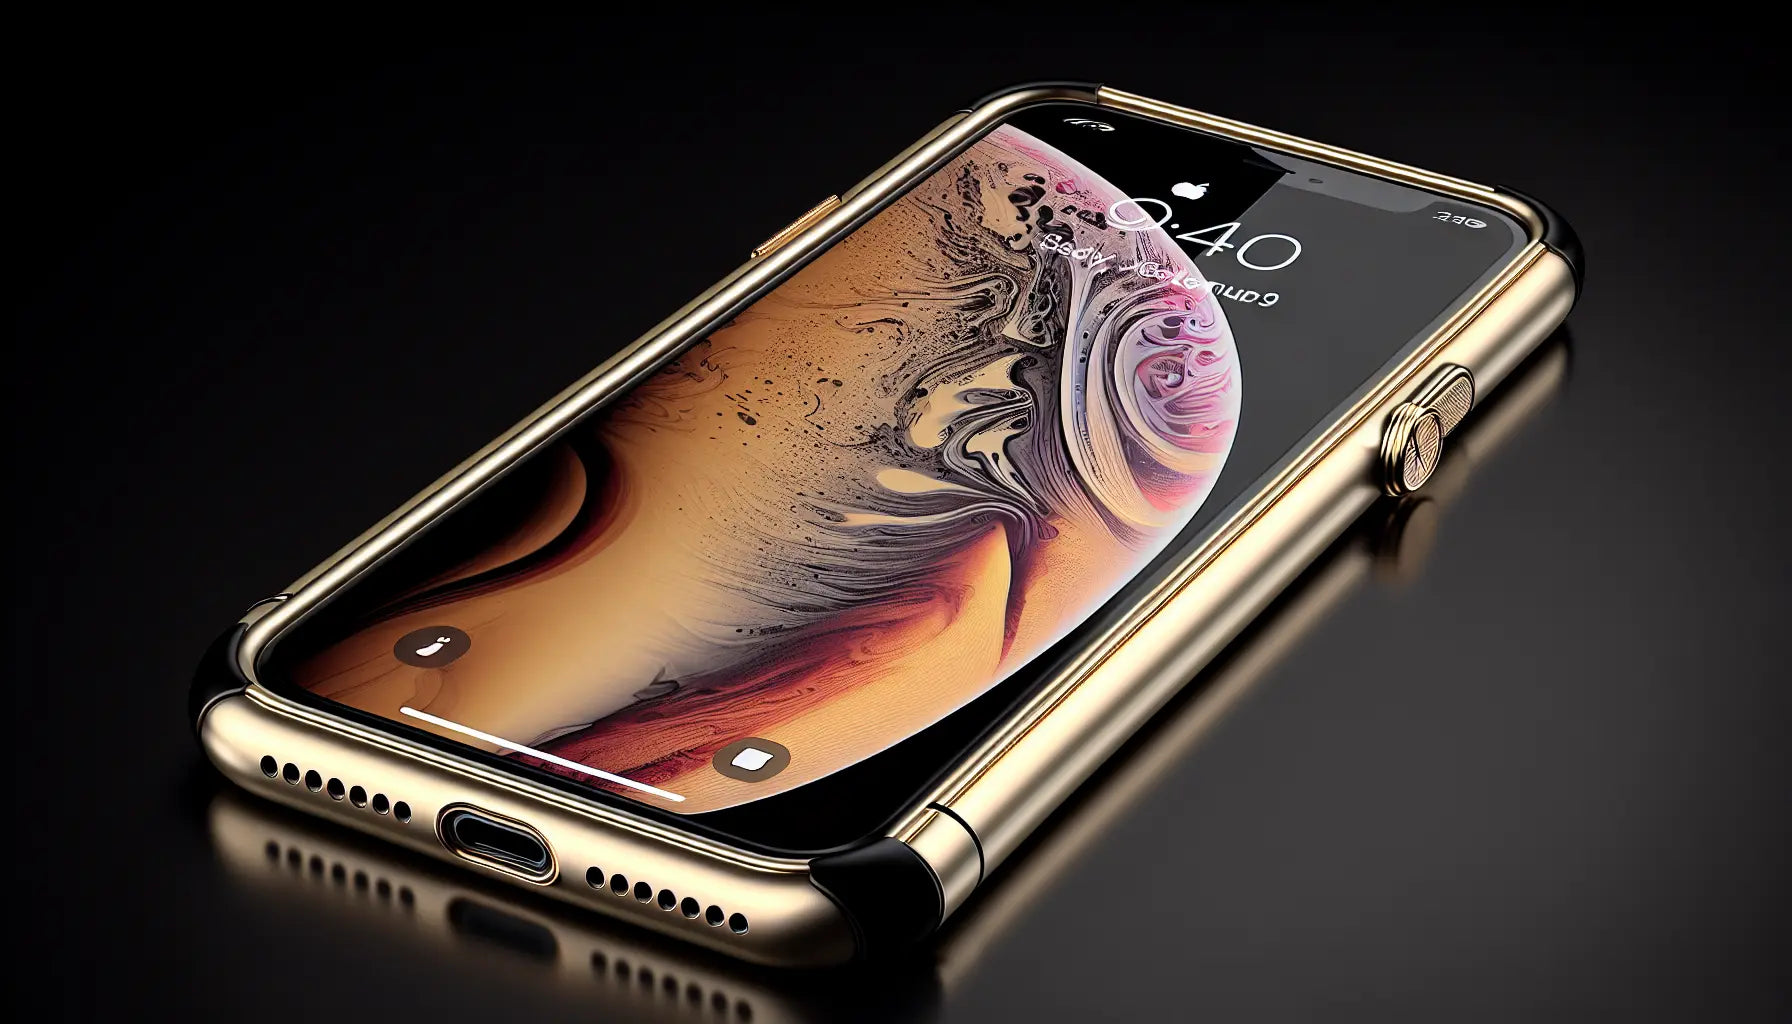 Apple iPhone XS: A Comprehensive Review and Analysis